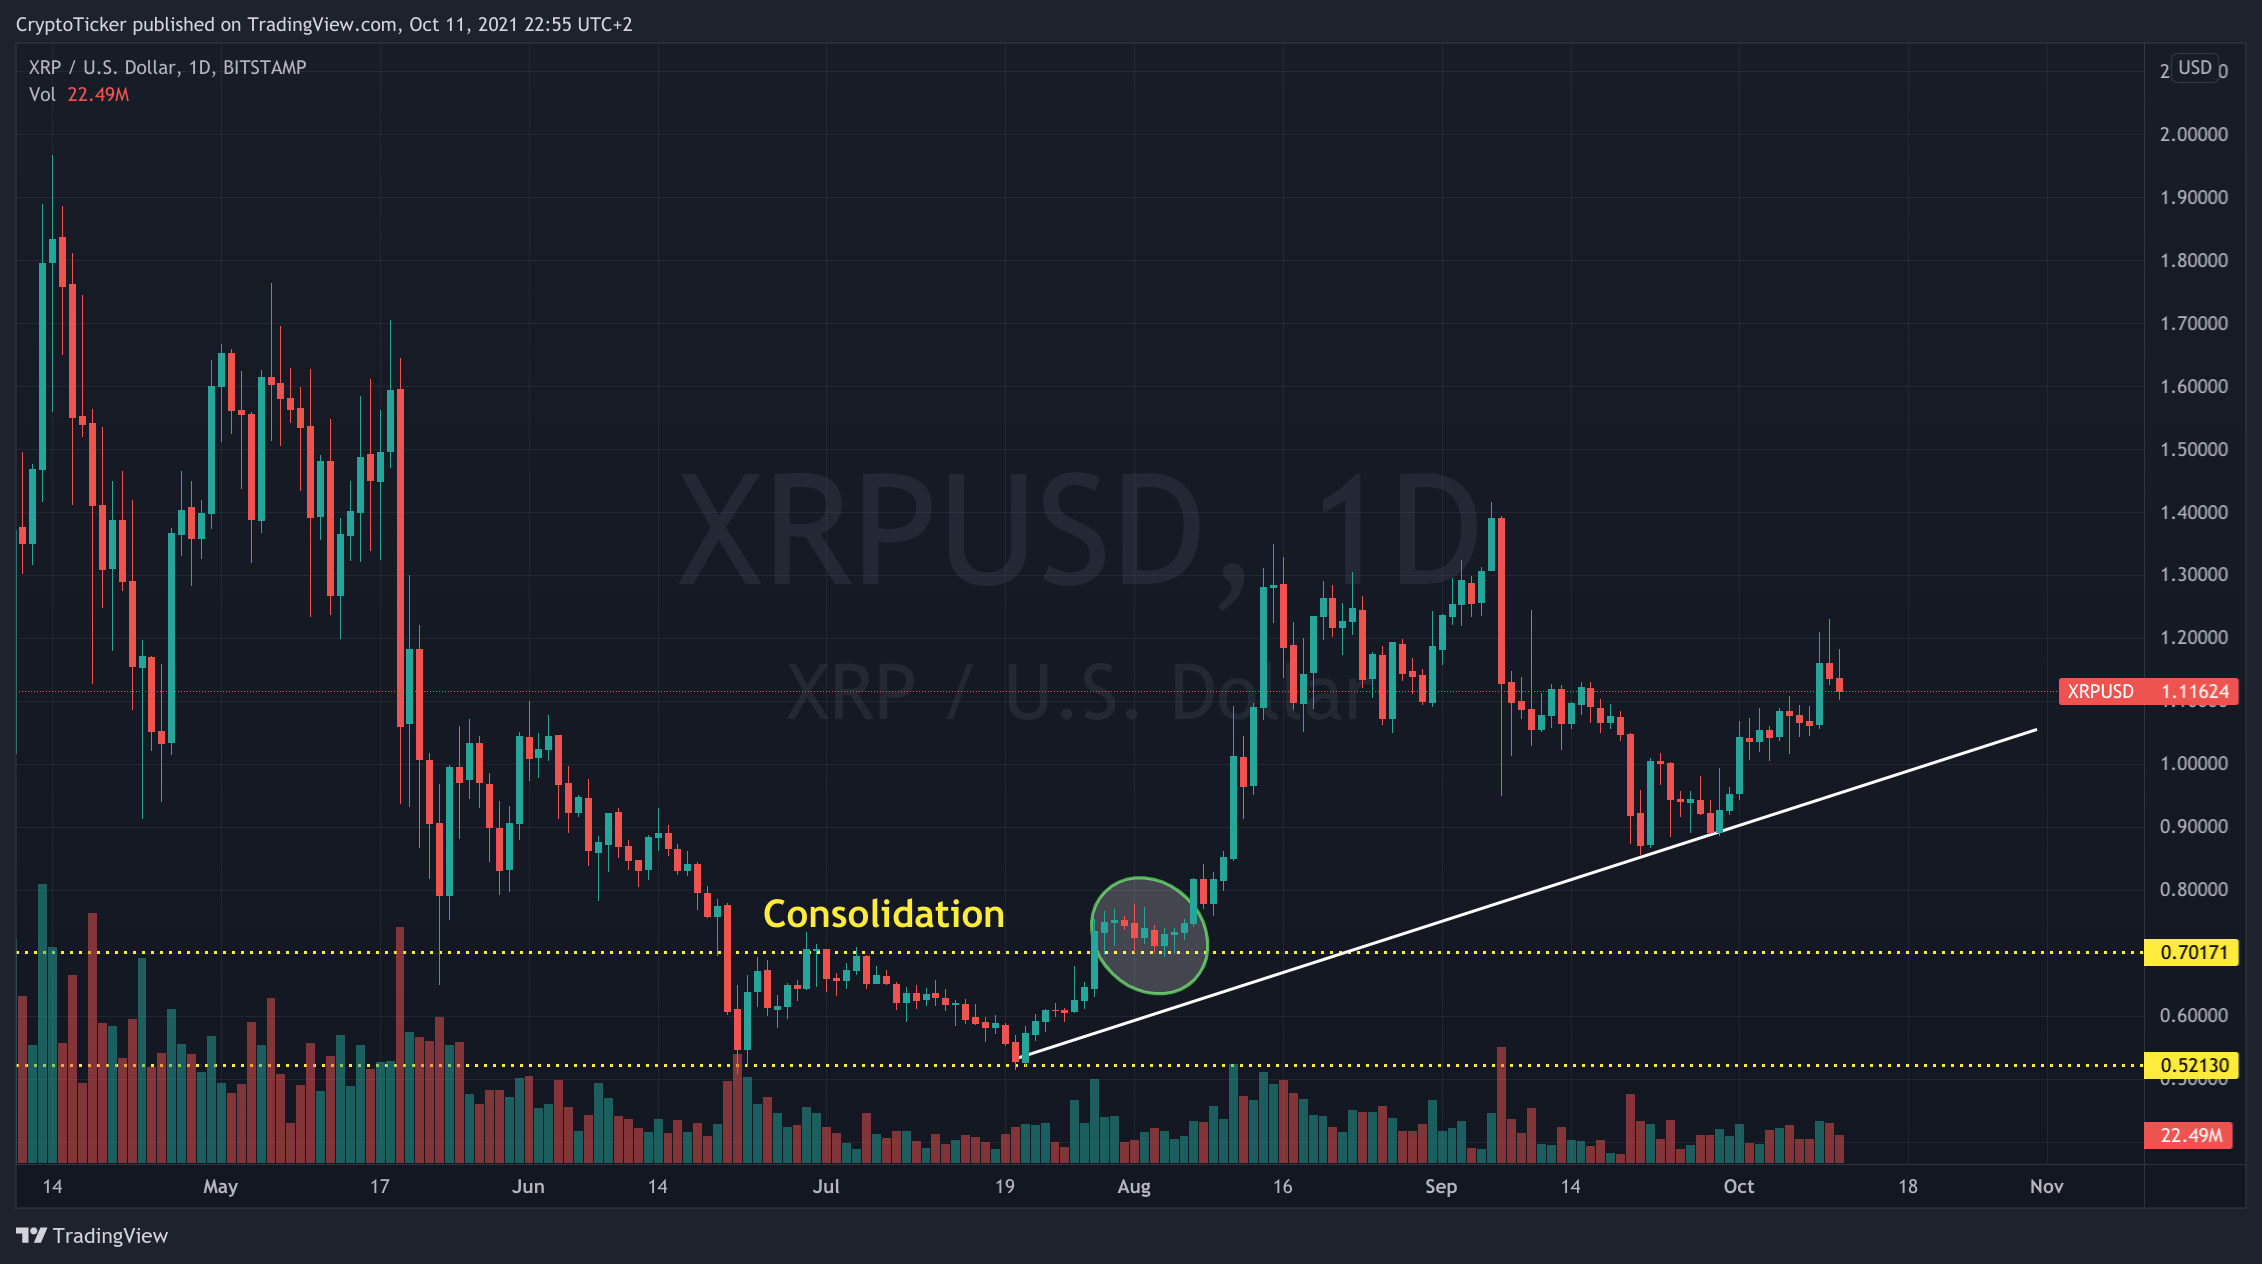 XRP/USD 1-day chart showing XRP's uptrend